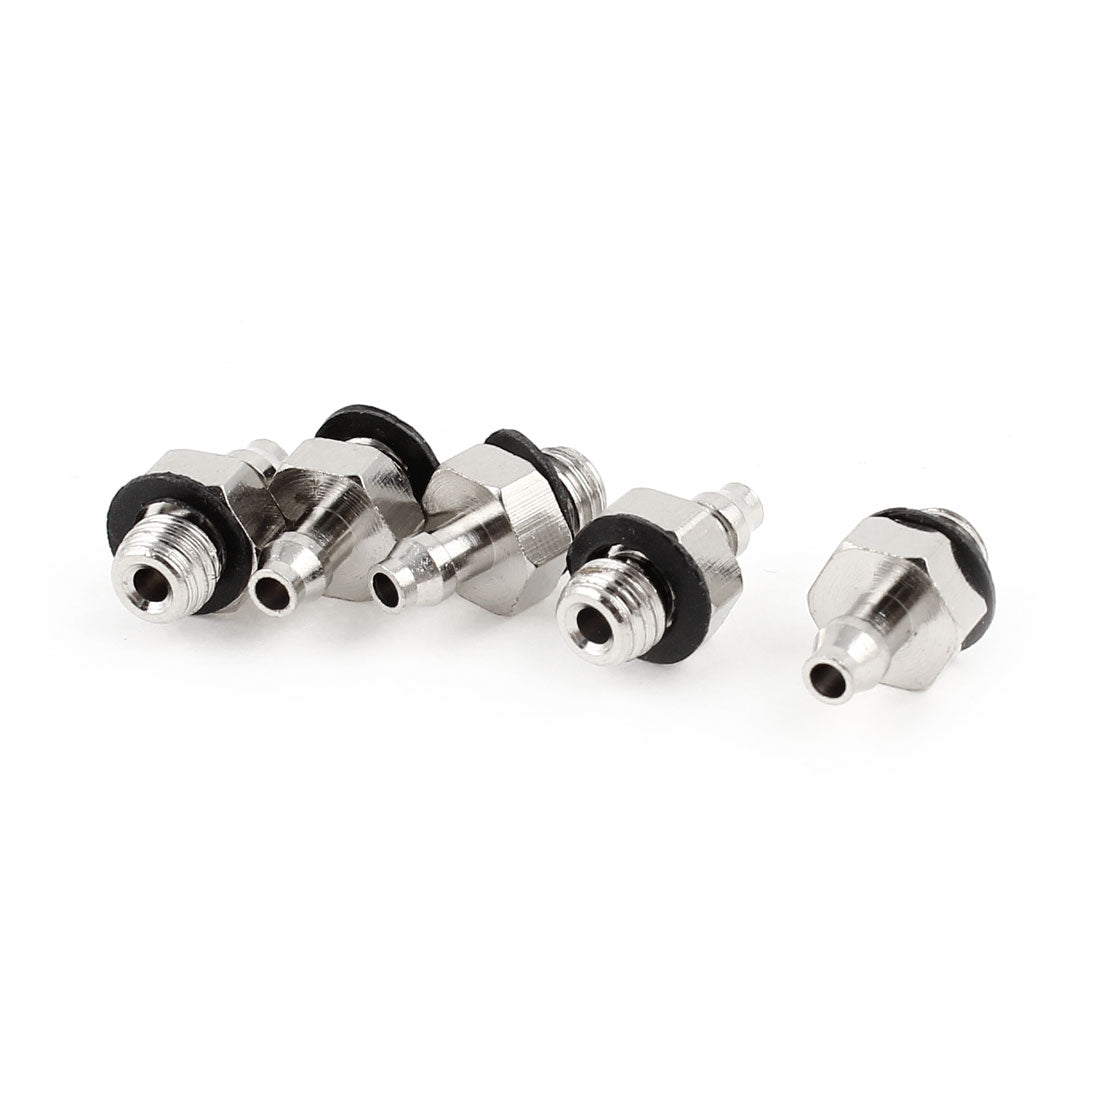 uxcell Uxcell 5 Pcs M5 5mm Male Threaded to 3.5mm Pneumatic Straight Hose Barb Fittings